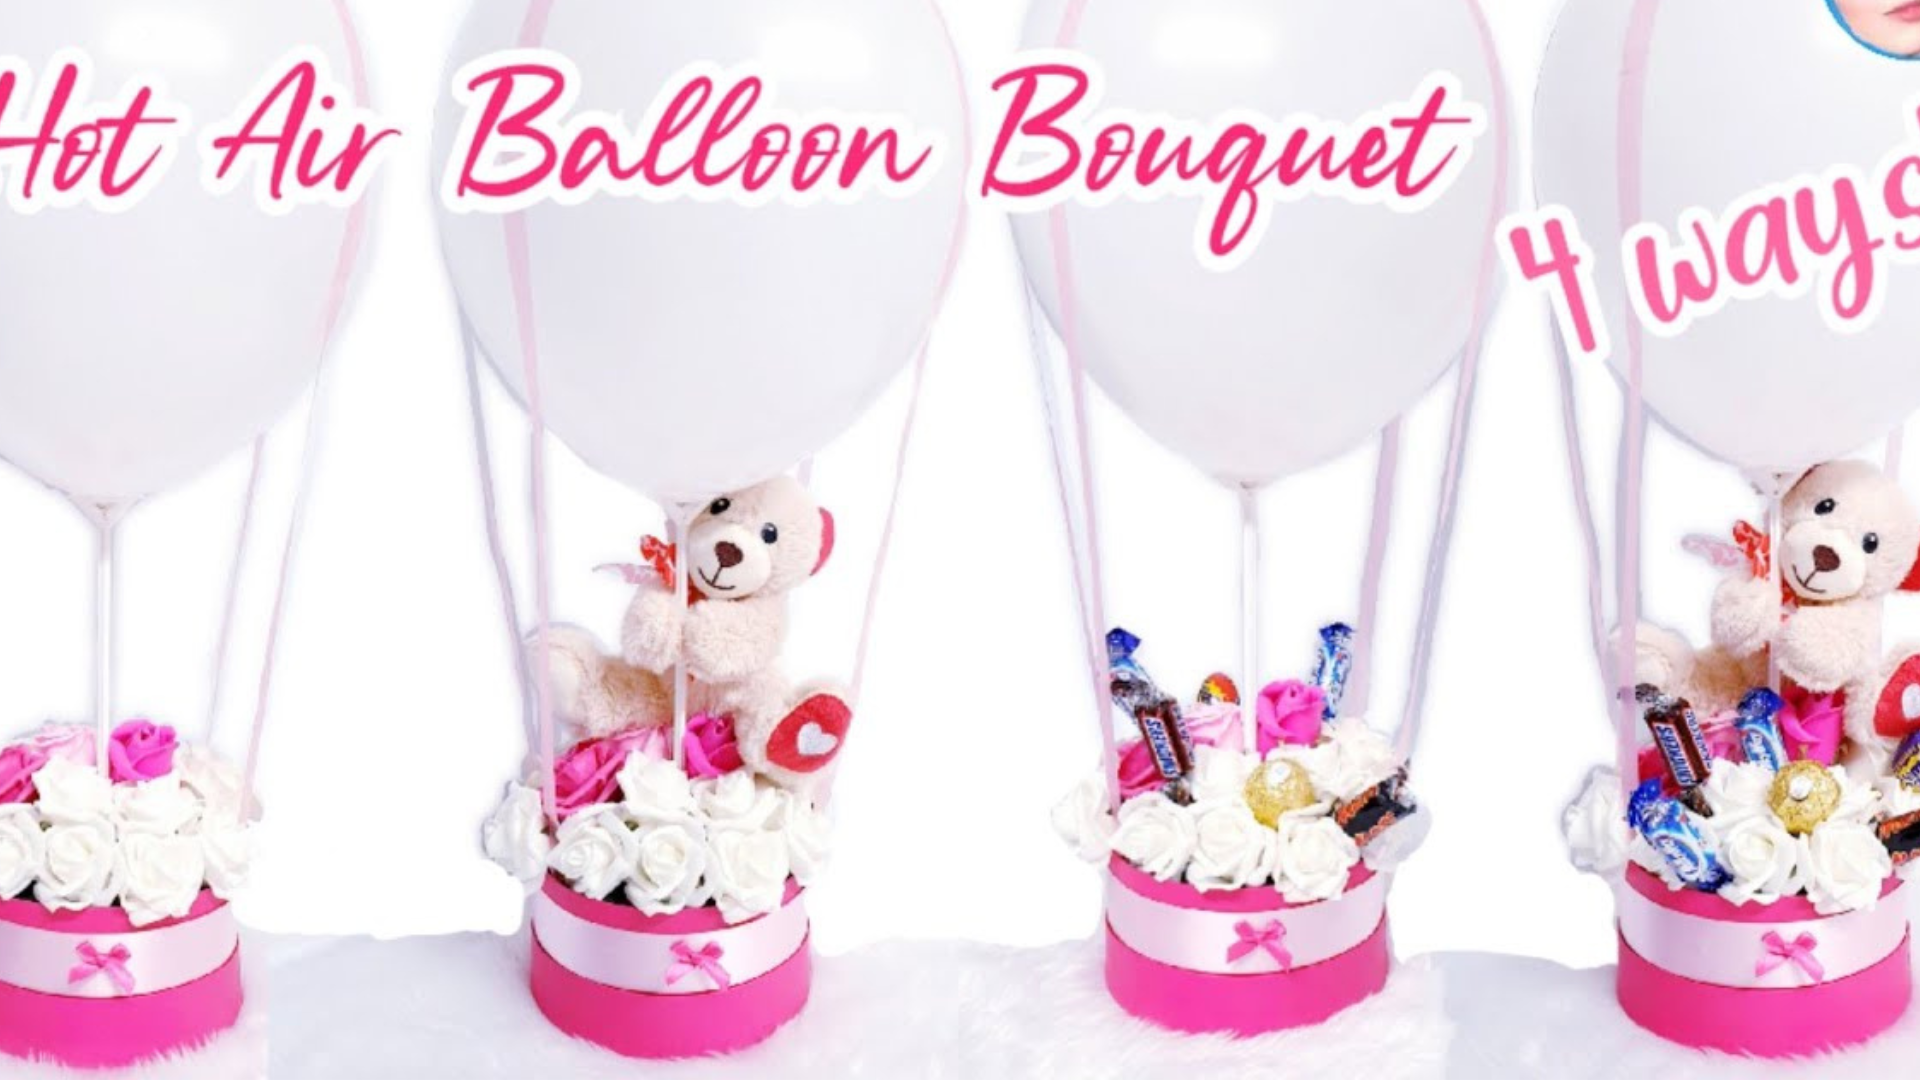 4 Balloon Hampers With Treats such as plushies and chocolates